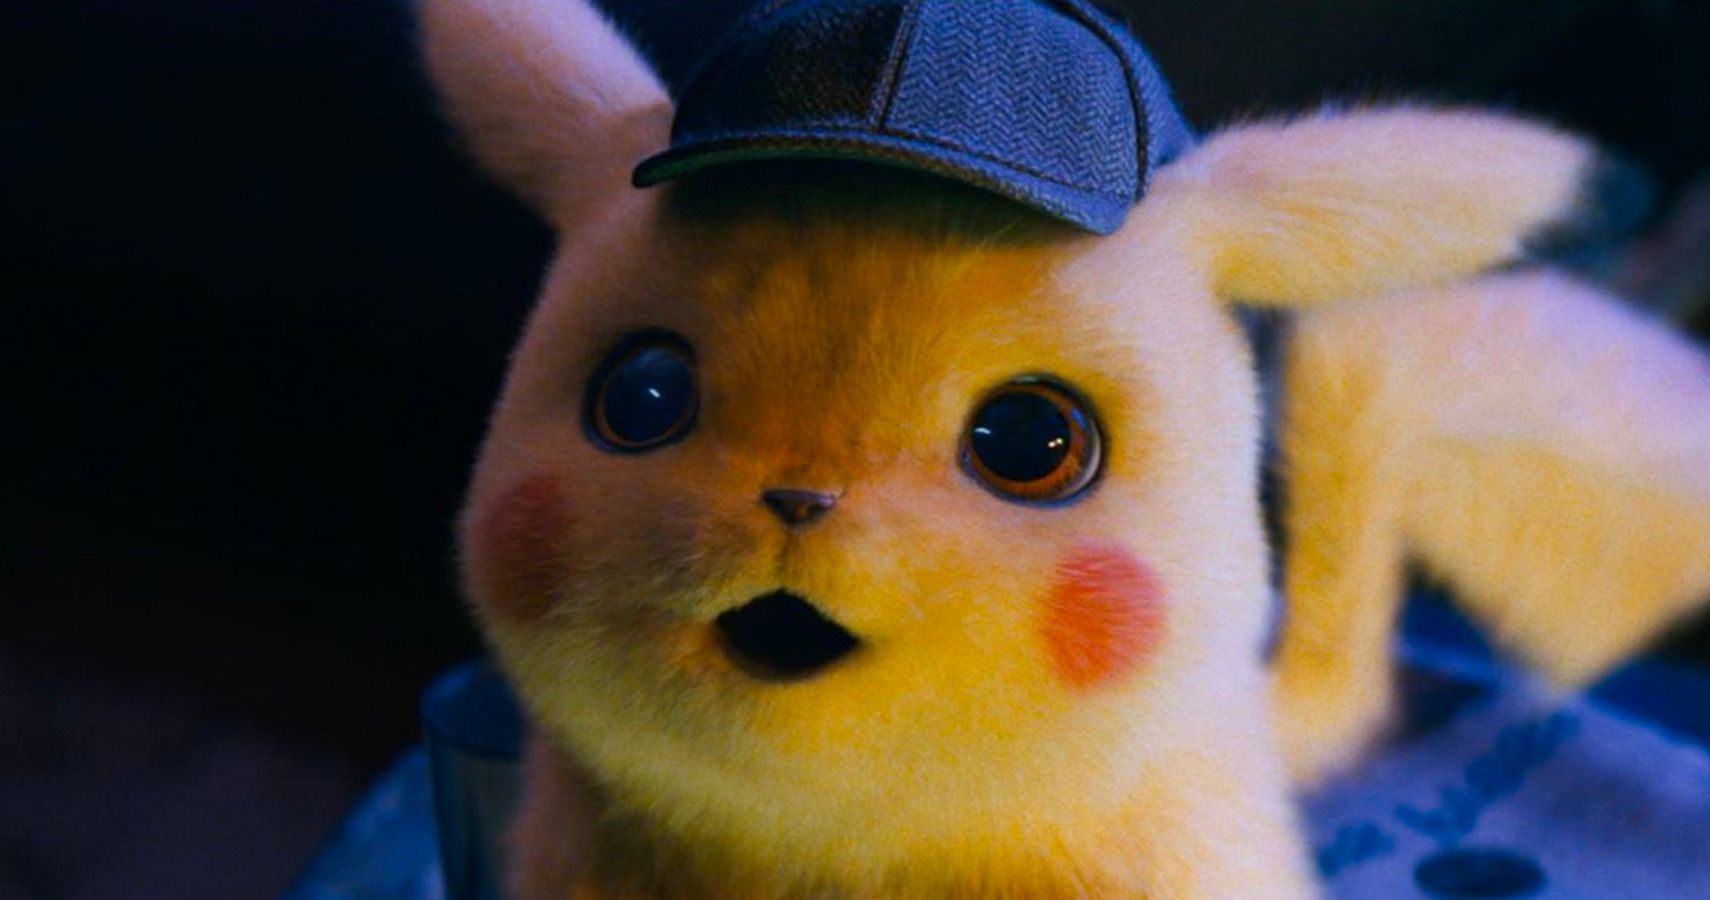 Detective Pikachu Almost Beat Warcraft For The HighestGrossing Video Game Movie Ever